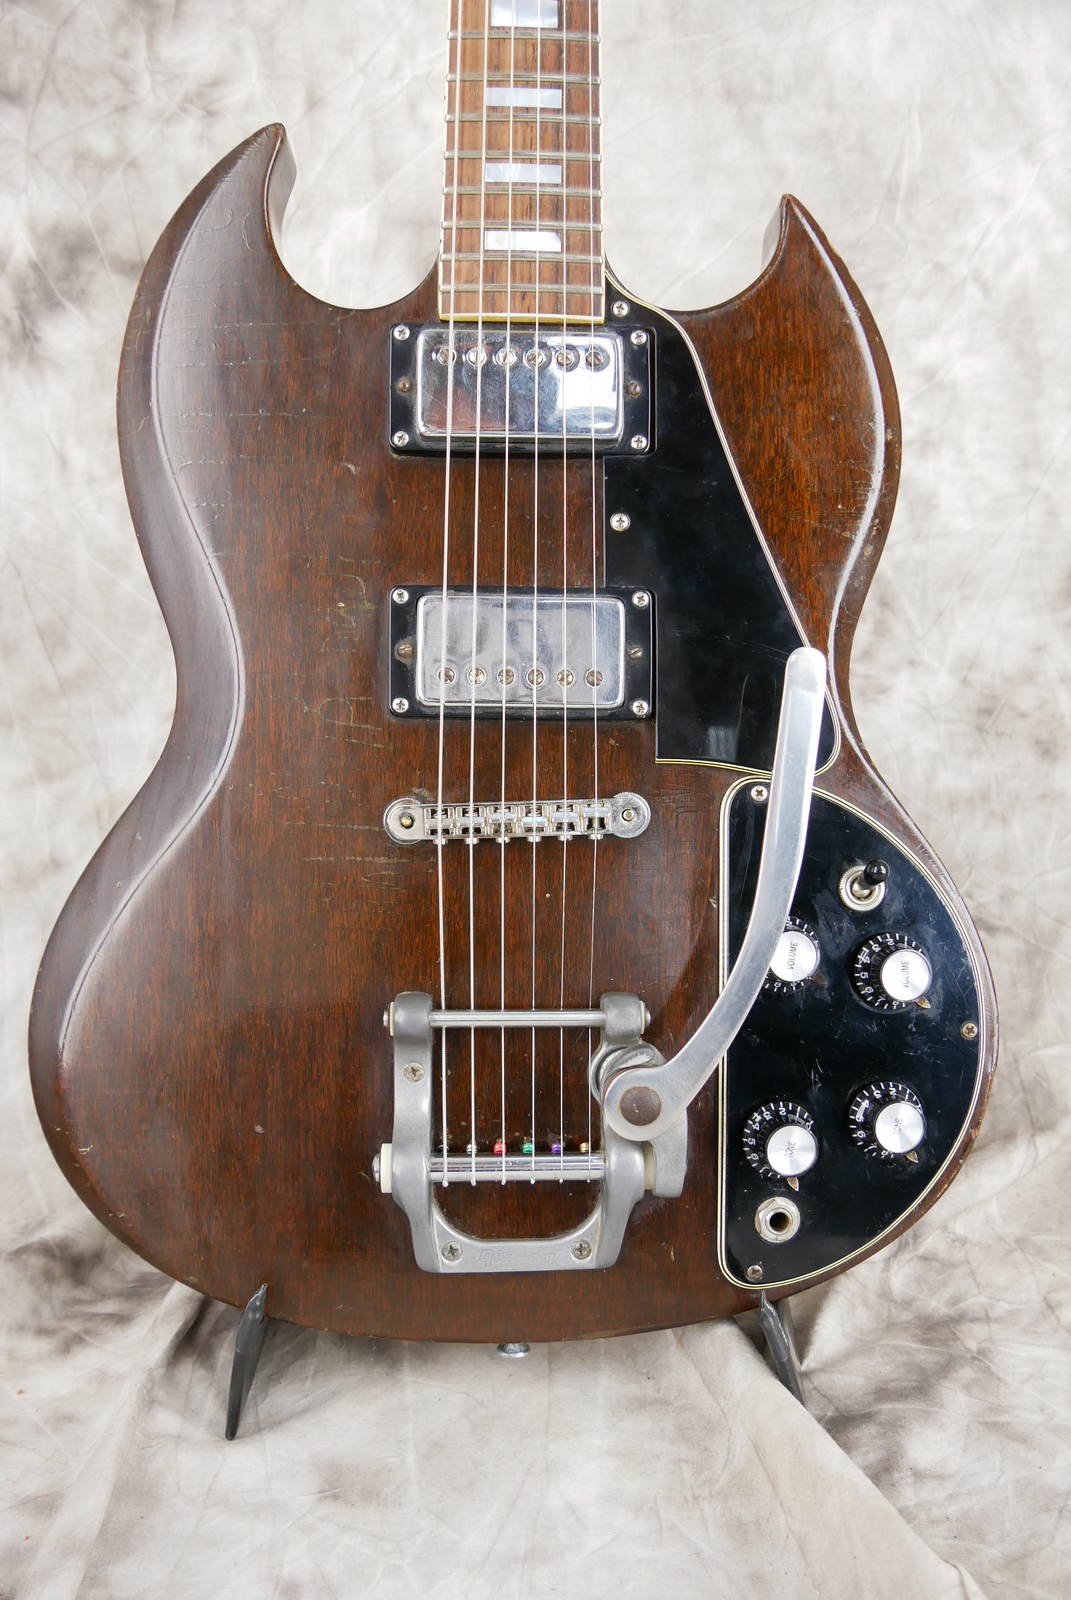 Gibson_SG_Deluxe_bigsby_1971_1972_walnut_cts-pots_1966-007.JPG